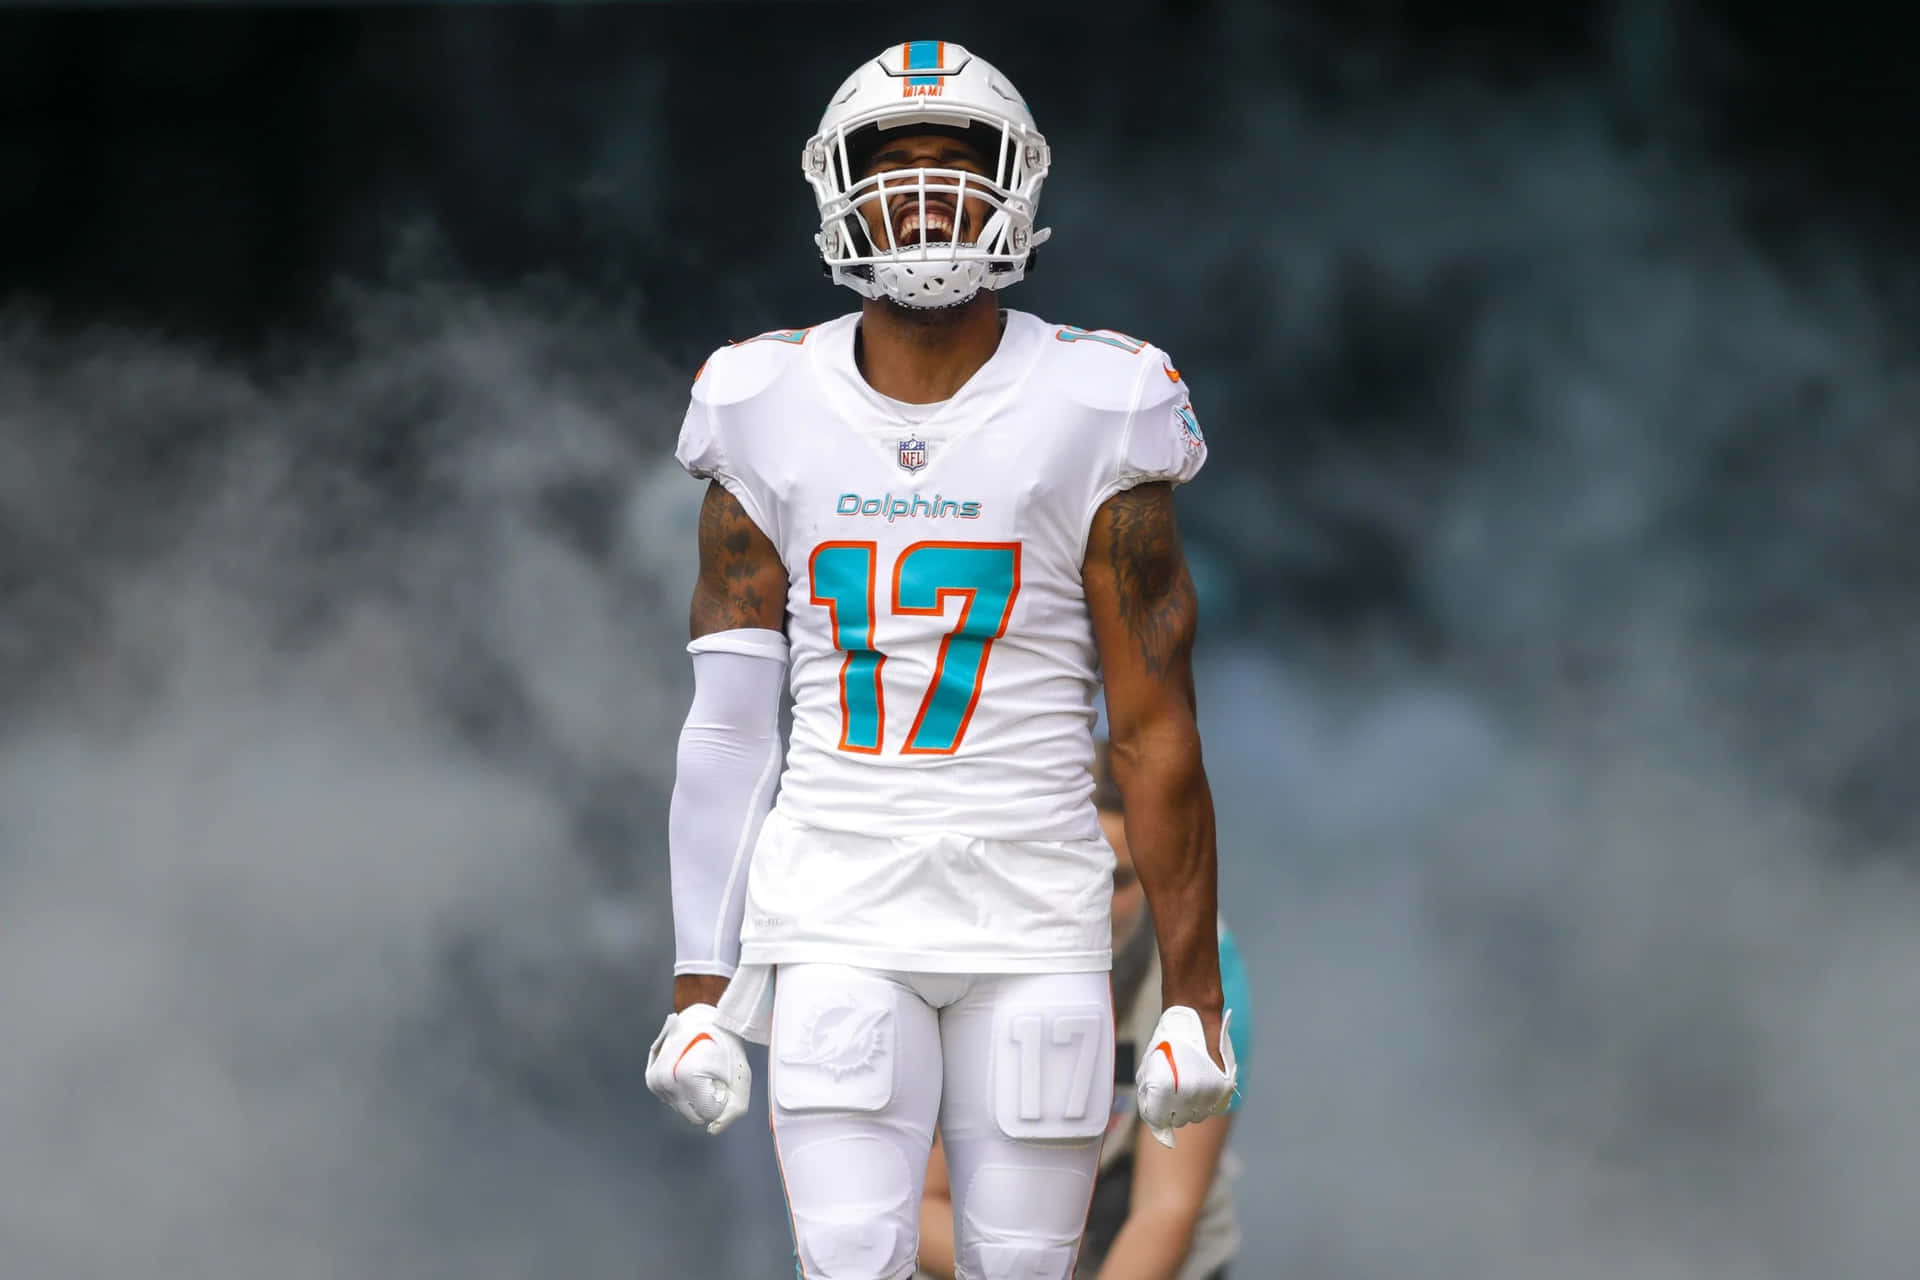 Miami Dolphins Player Number17 Wallpaper